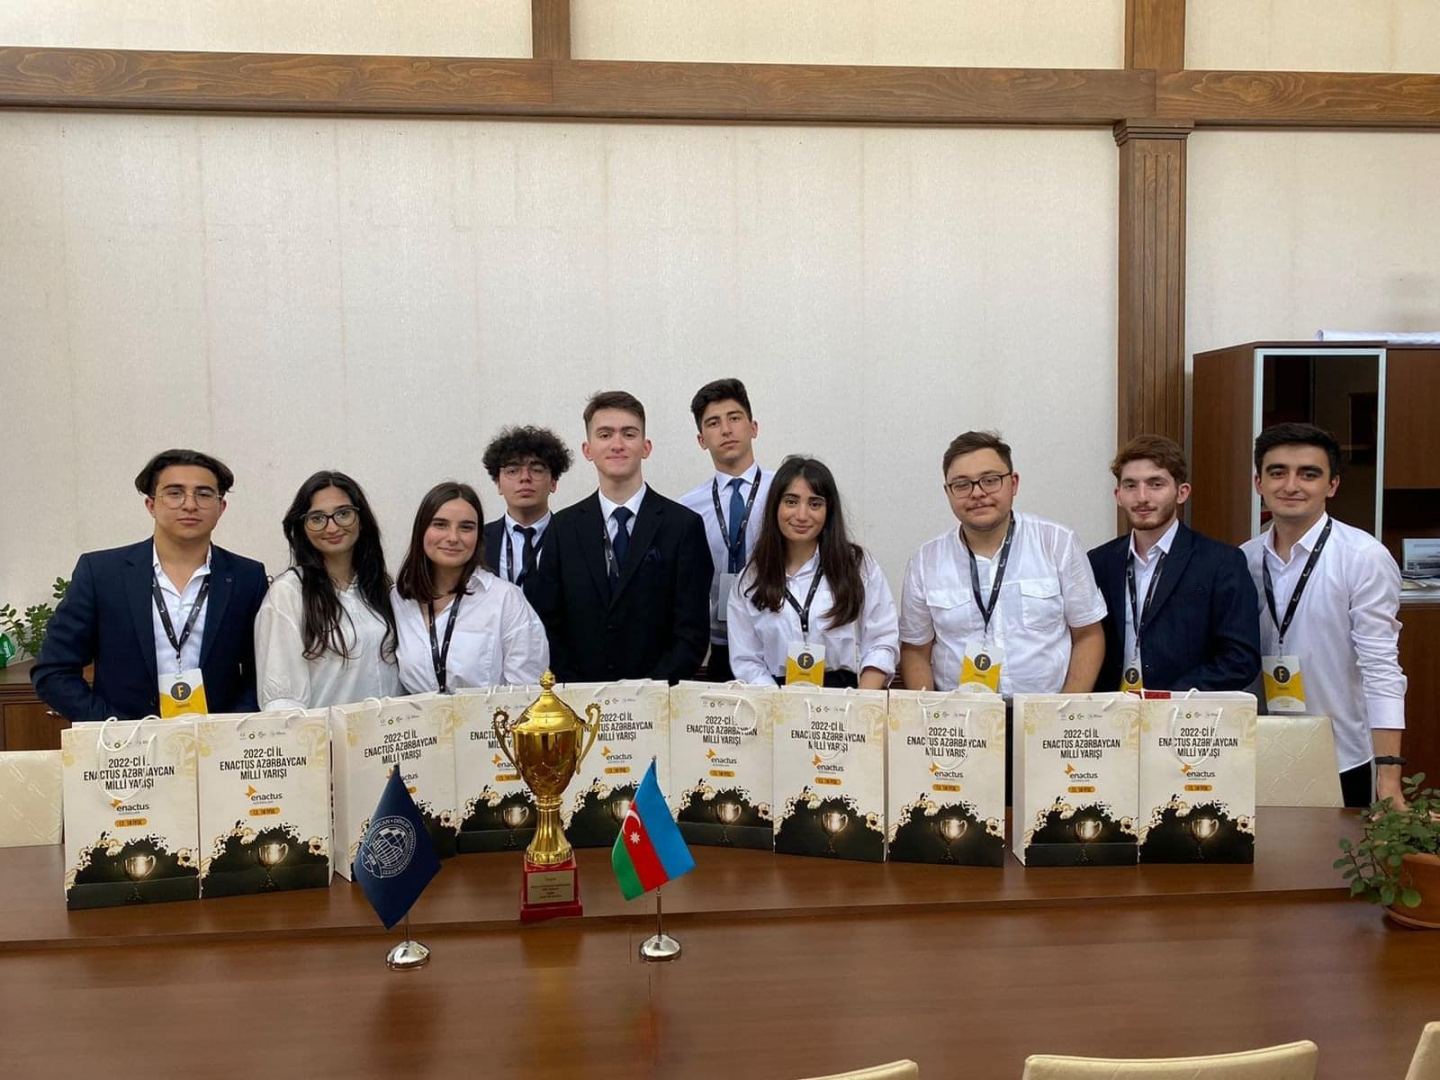 UNEC team wins the "2022 Enactus Azerbaijan" national competition! (AD)